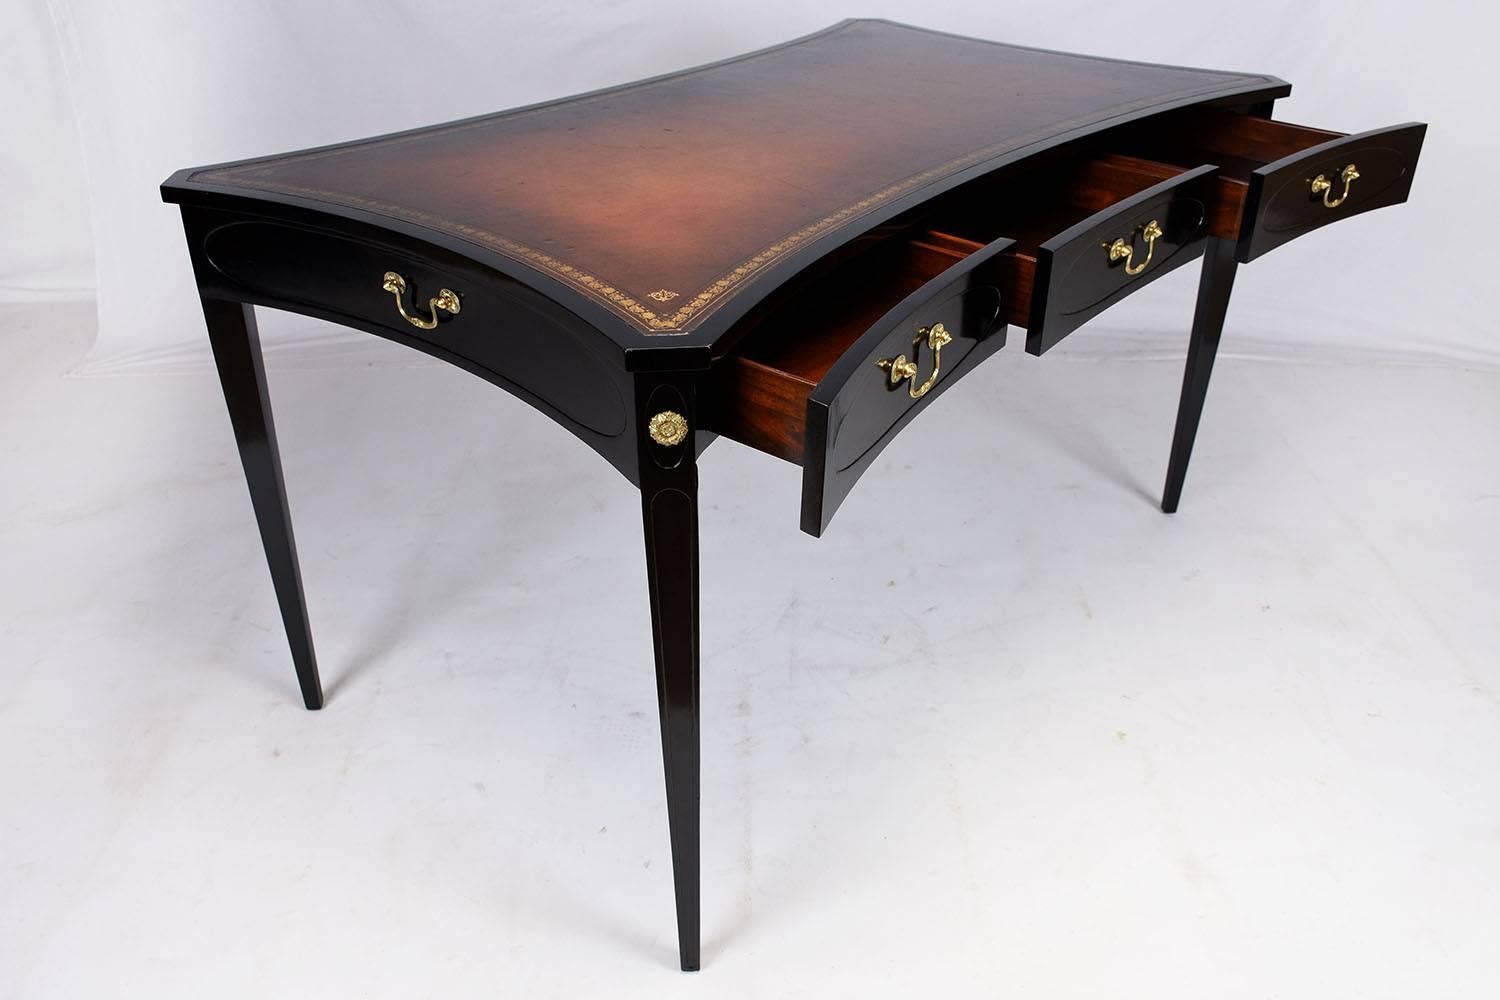 French Regency-Style Desk with Embossed Leather